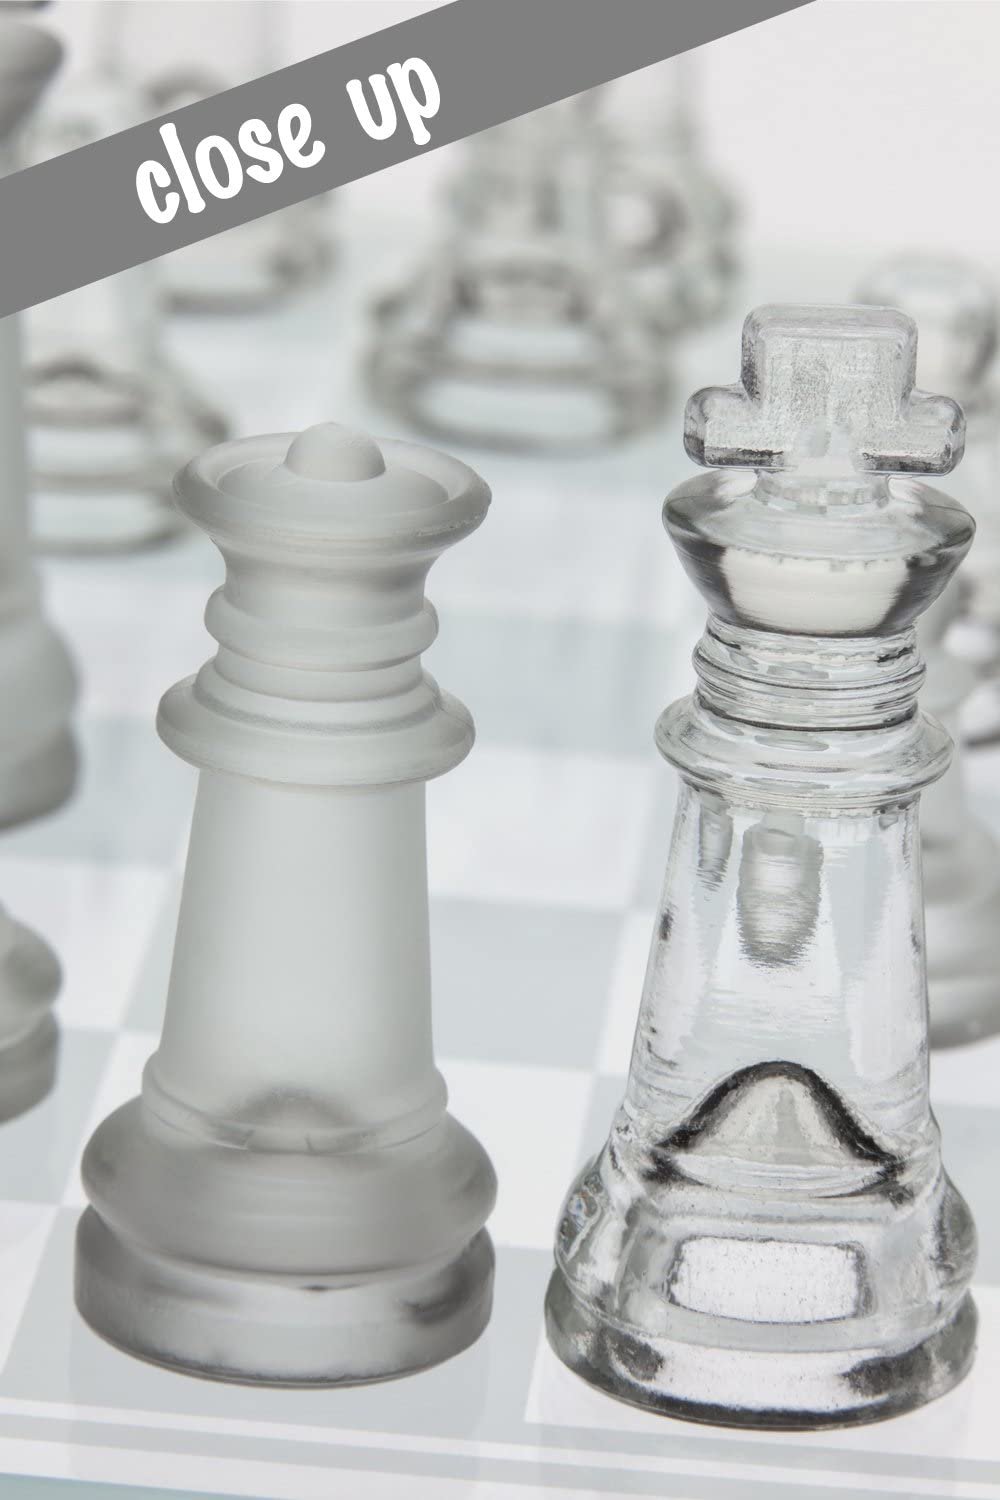 Gamie Glass Chess Set, Elegant Design - Durable Build - Fully Functional - 32 Frosted and Clear Pieces - Felted Bottoms - Easy to Carry - Reassuringly Stable (14 Inch)